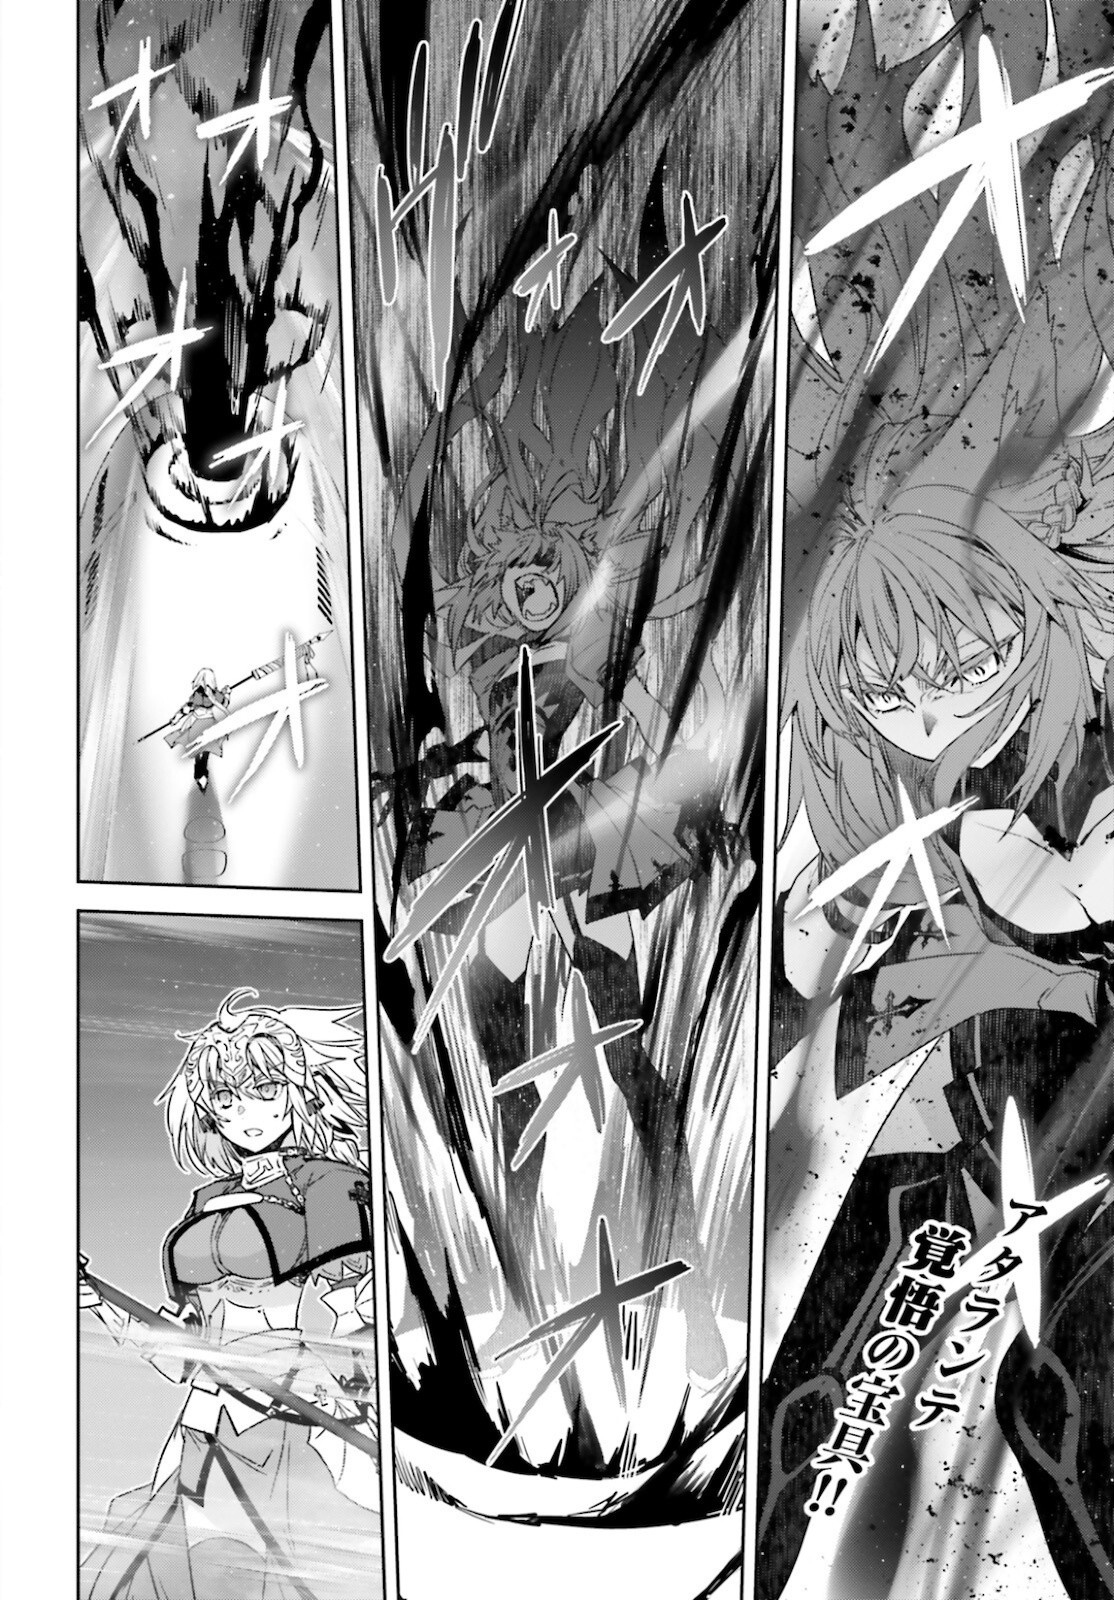 Fate-Apocrypha - Chapter 55-2 - Page 1